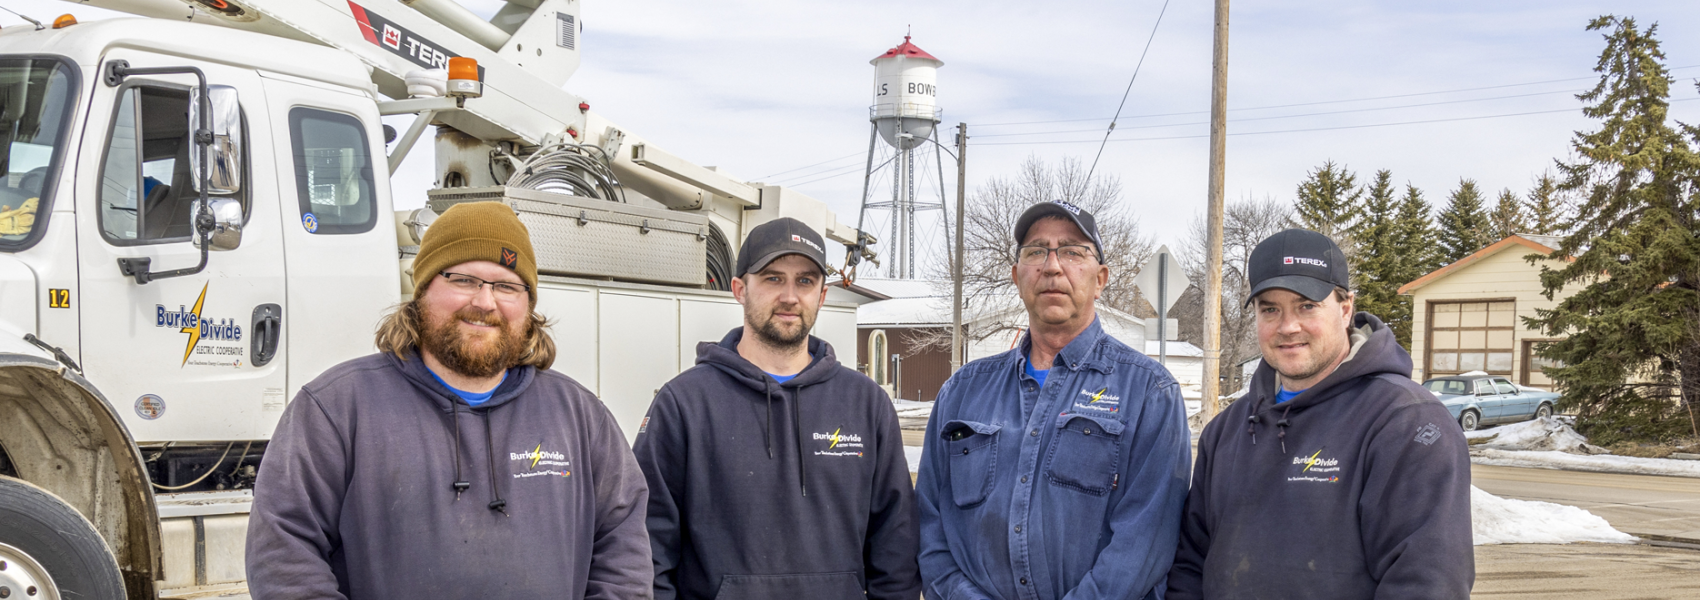 Terry Knutson, Kyle Helmers, Joe Thomas and Jason Bruner have been the faces of  Burke-Divide Electric Cooperative's Kenmare line crew.